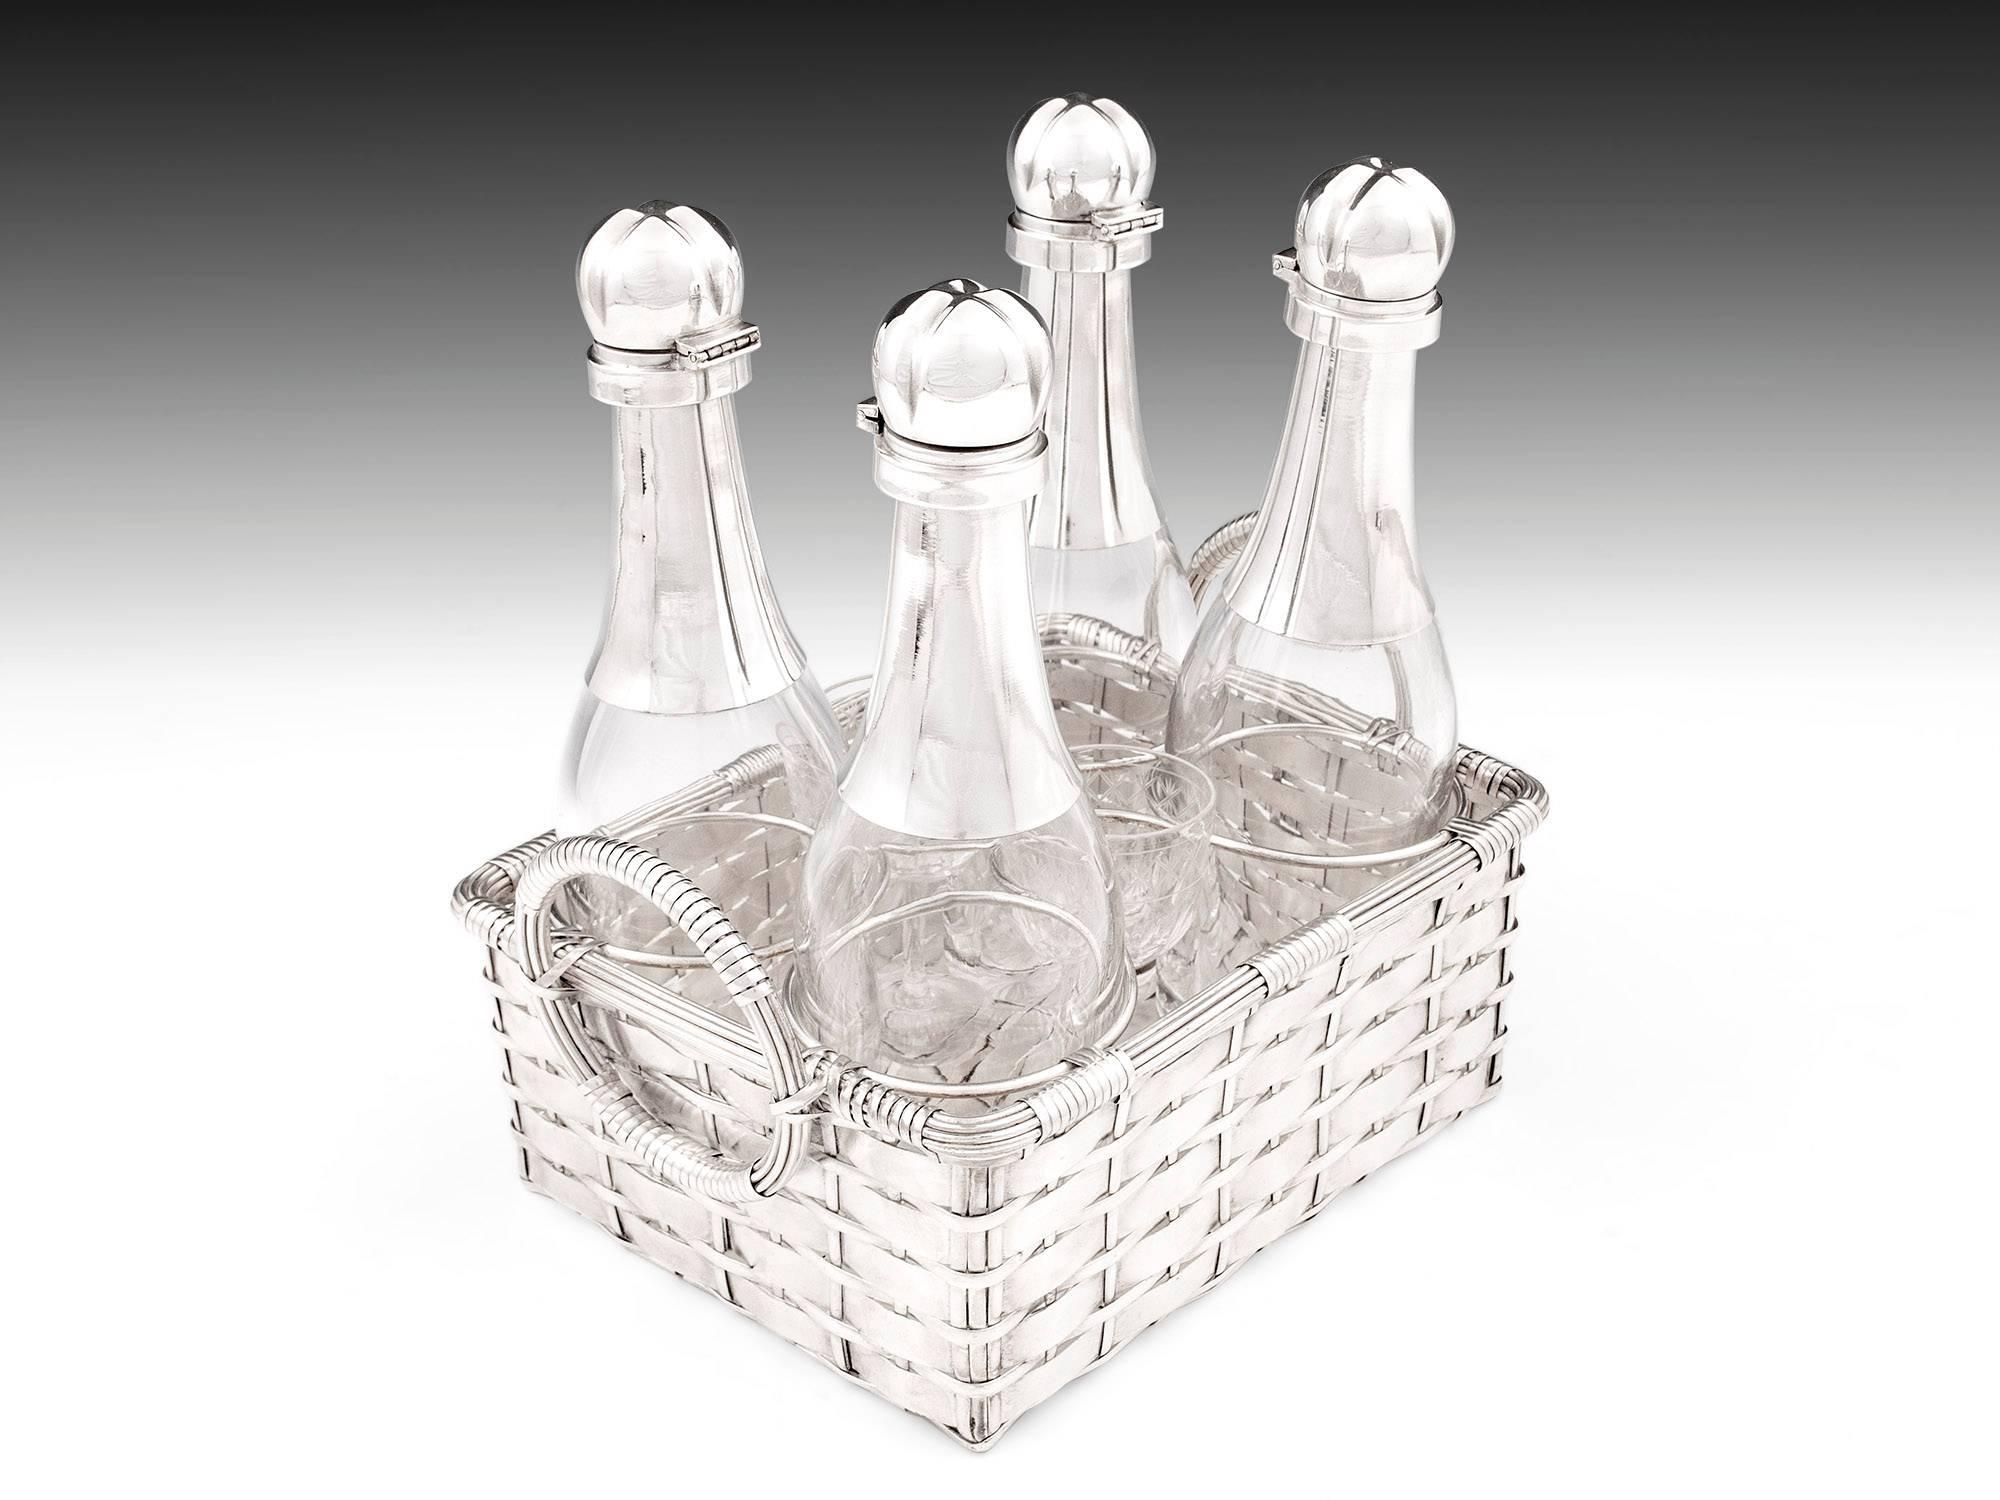 Stunning silver plated champagne bottle decanters housed in weaved basket with carry handles including two liqueur glasses. 

The four decanters have silver plated necks and caps. Lifting the hinged cap will reveal a glass stopper in each of the